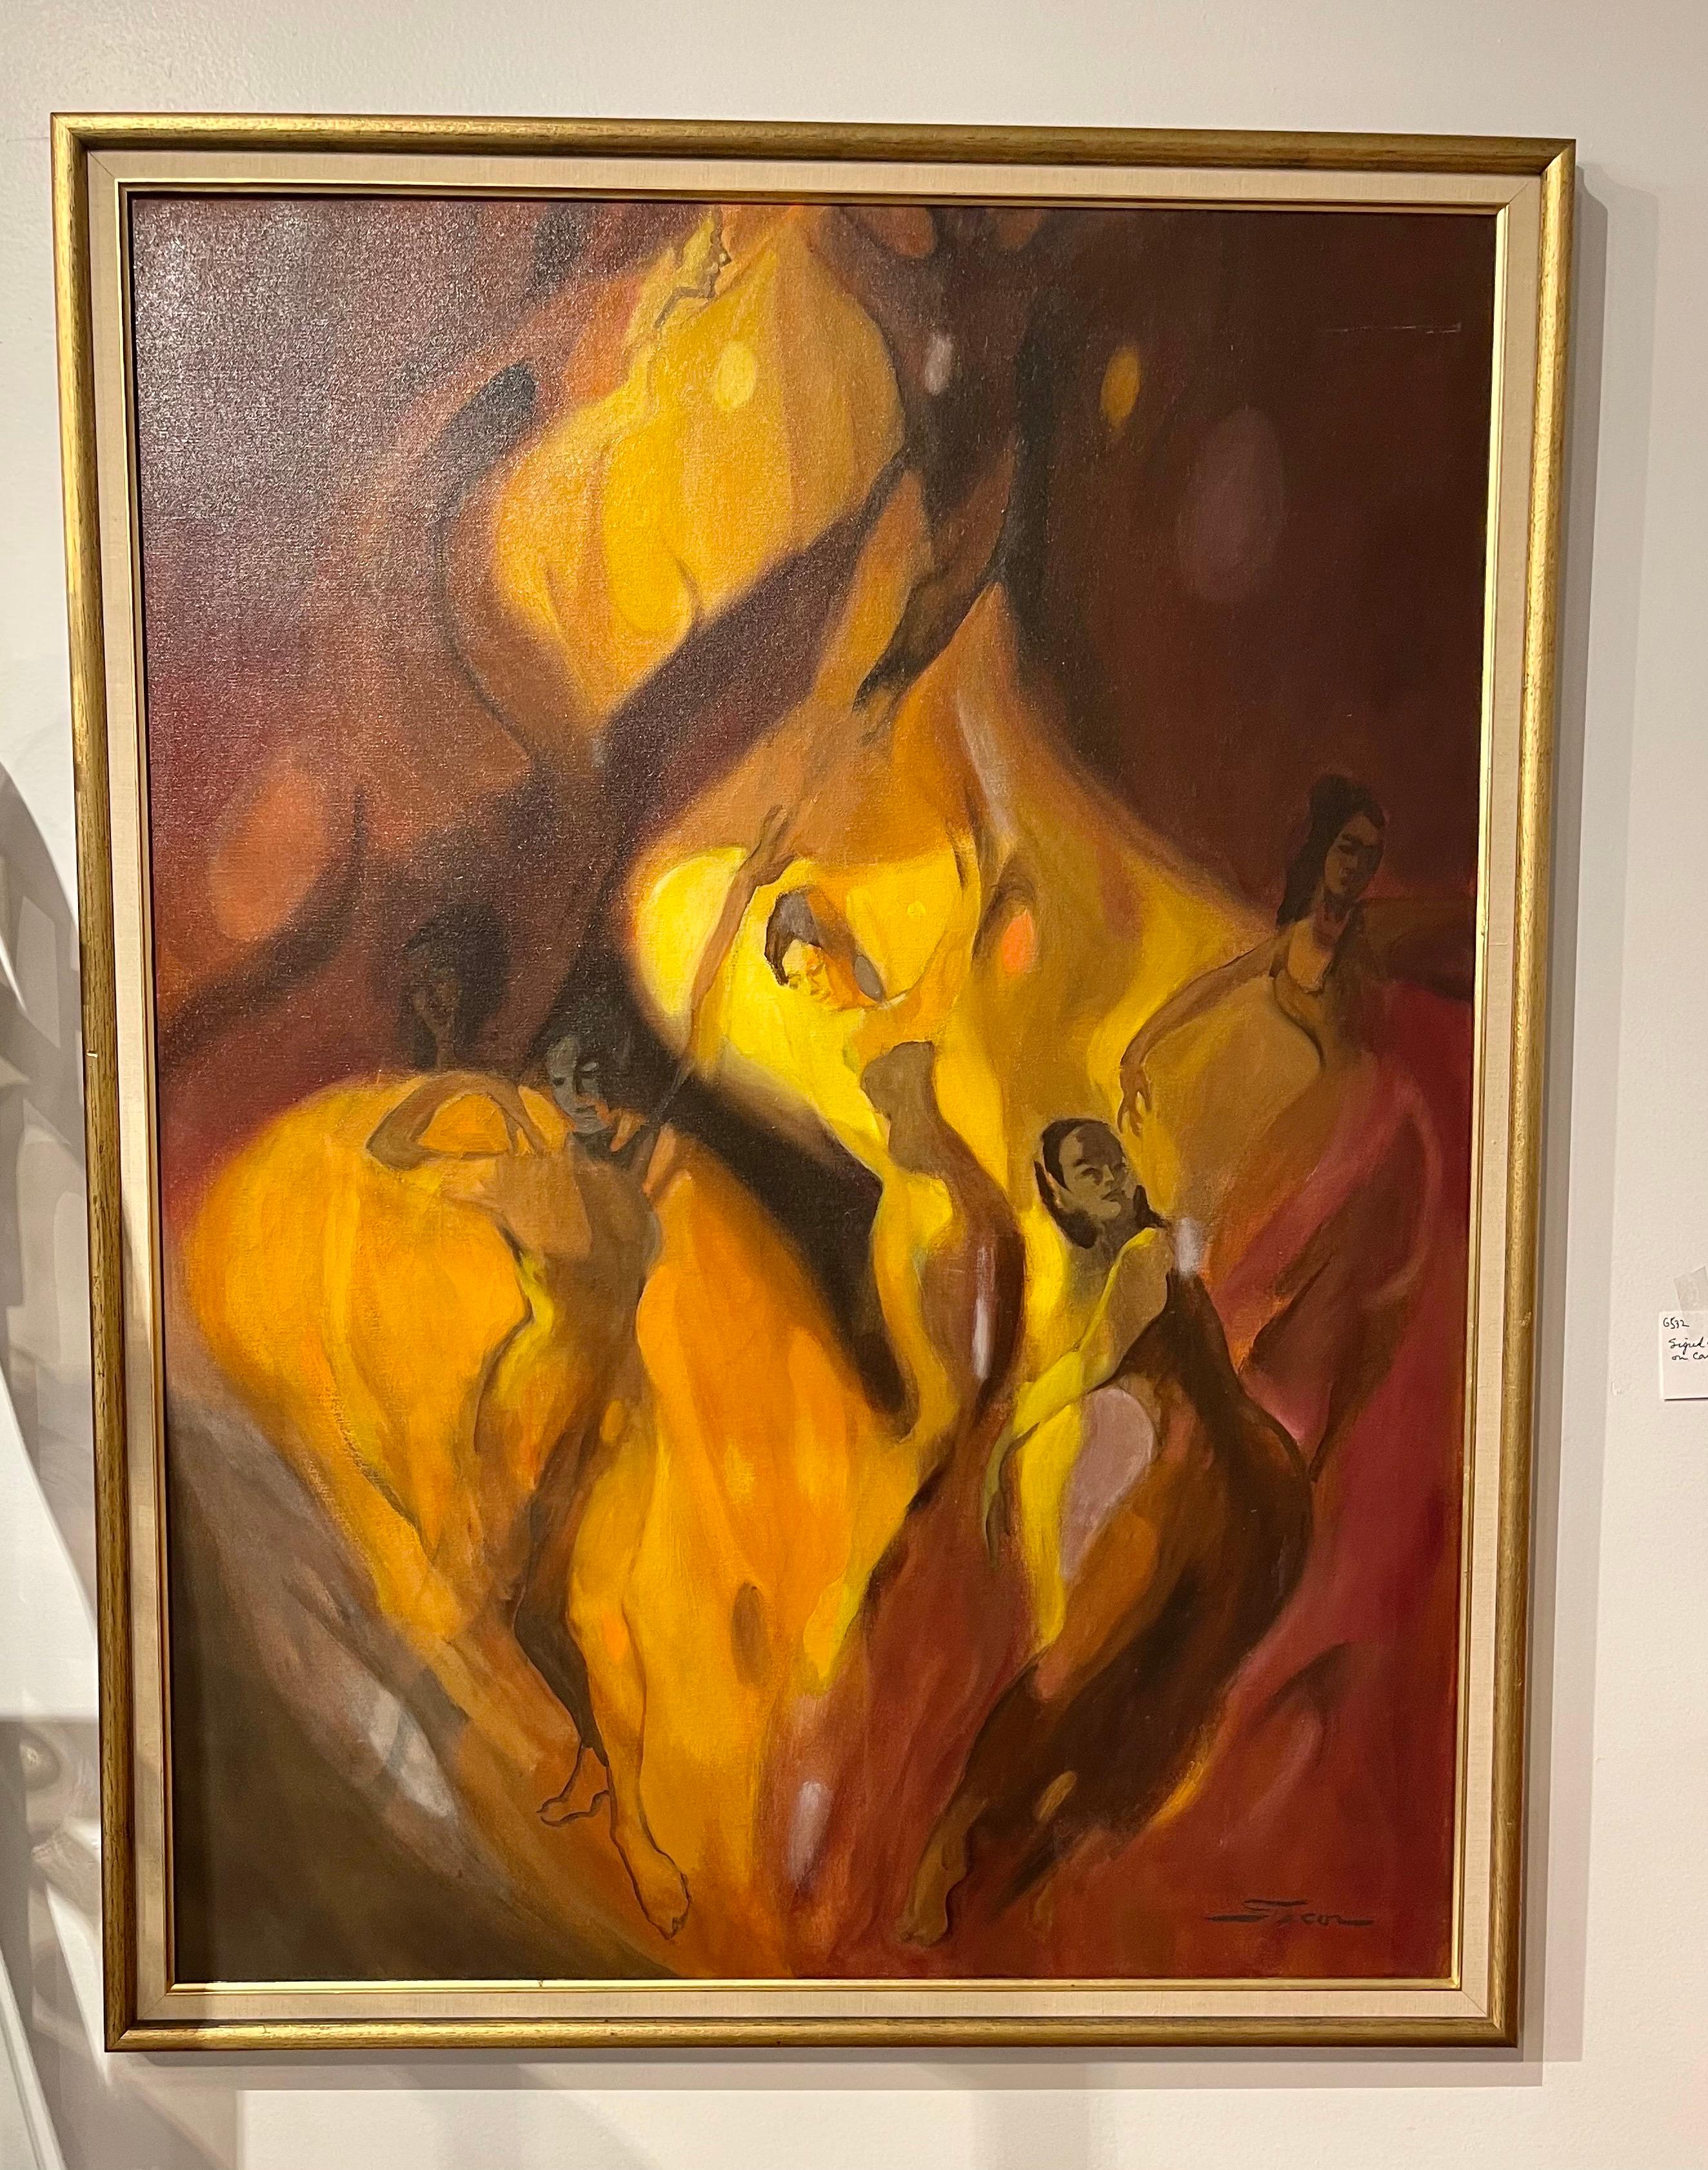 Iconic mid-century signed original oil on canvas. Signature on bottom right.
Features subtle dancing Bond girls throughout when you look closely. Why not own the best?